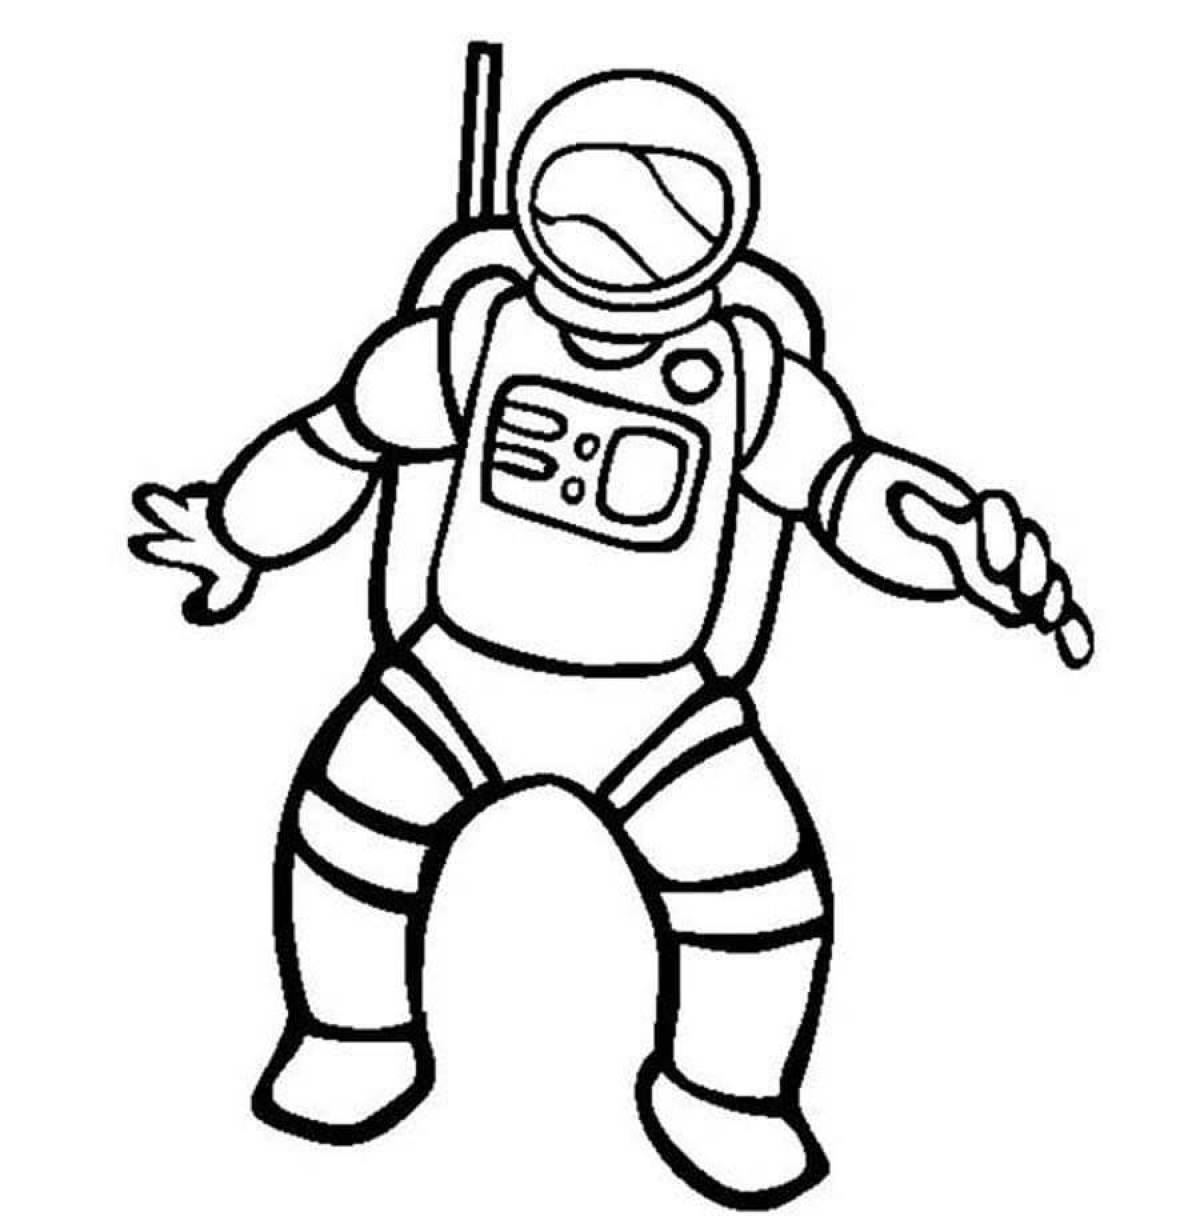 Coloring book cheerful astronaut